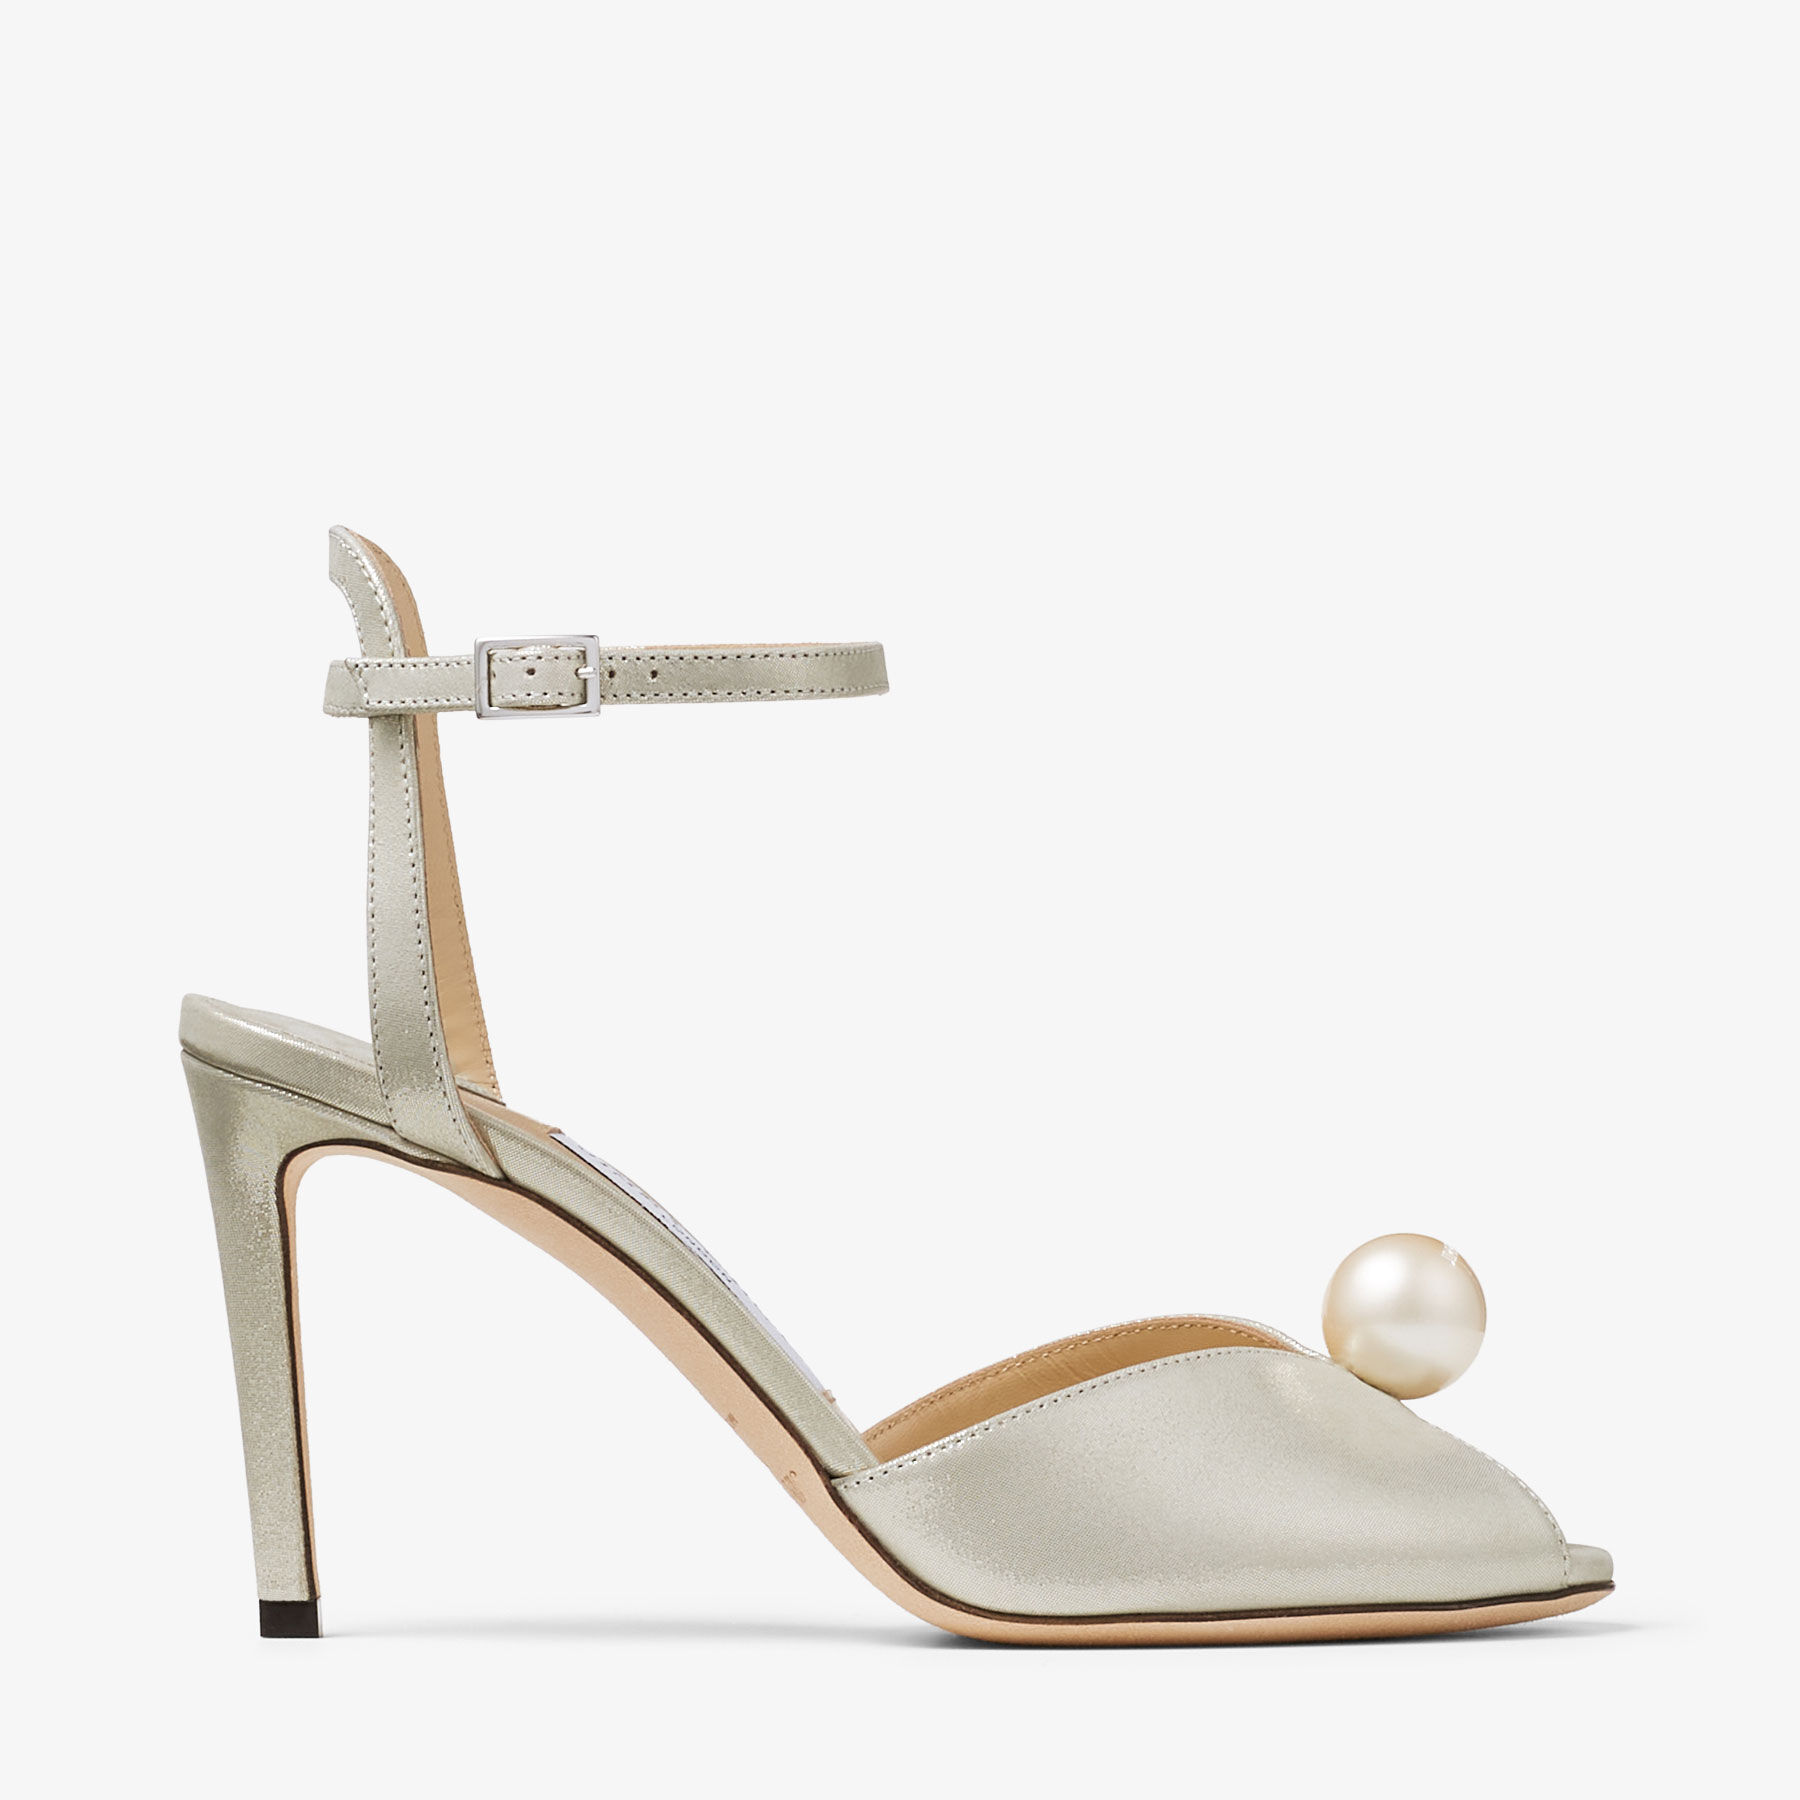 SACORA 85 | Champagne Shimmer Suede Sandals with Pearl Embellishment ...